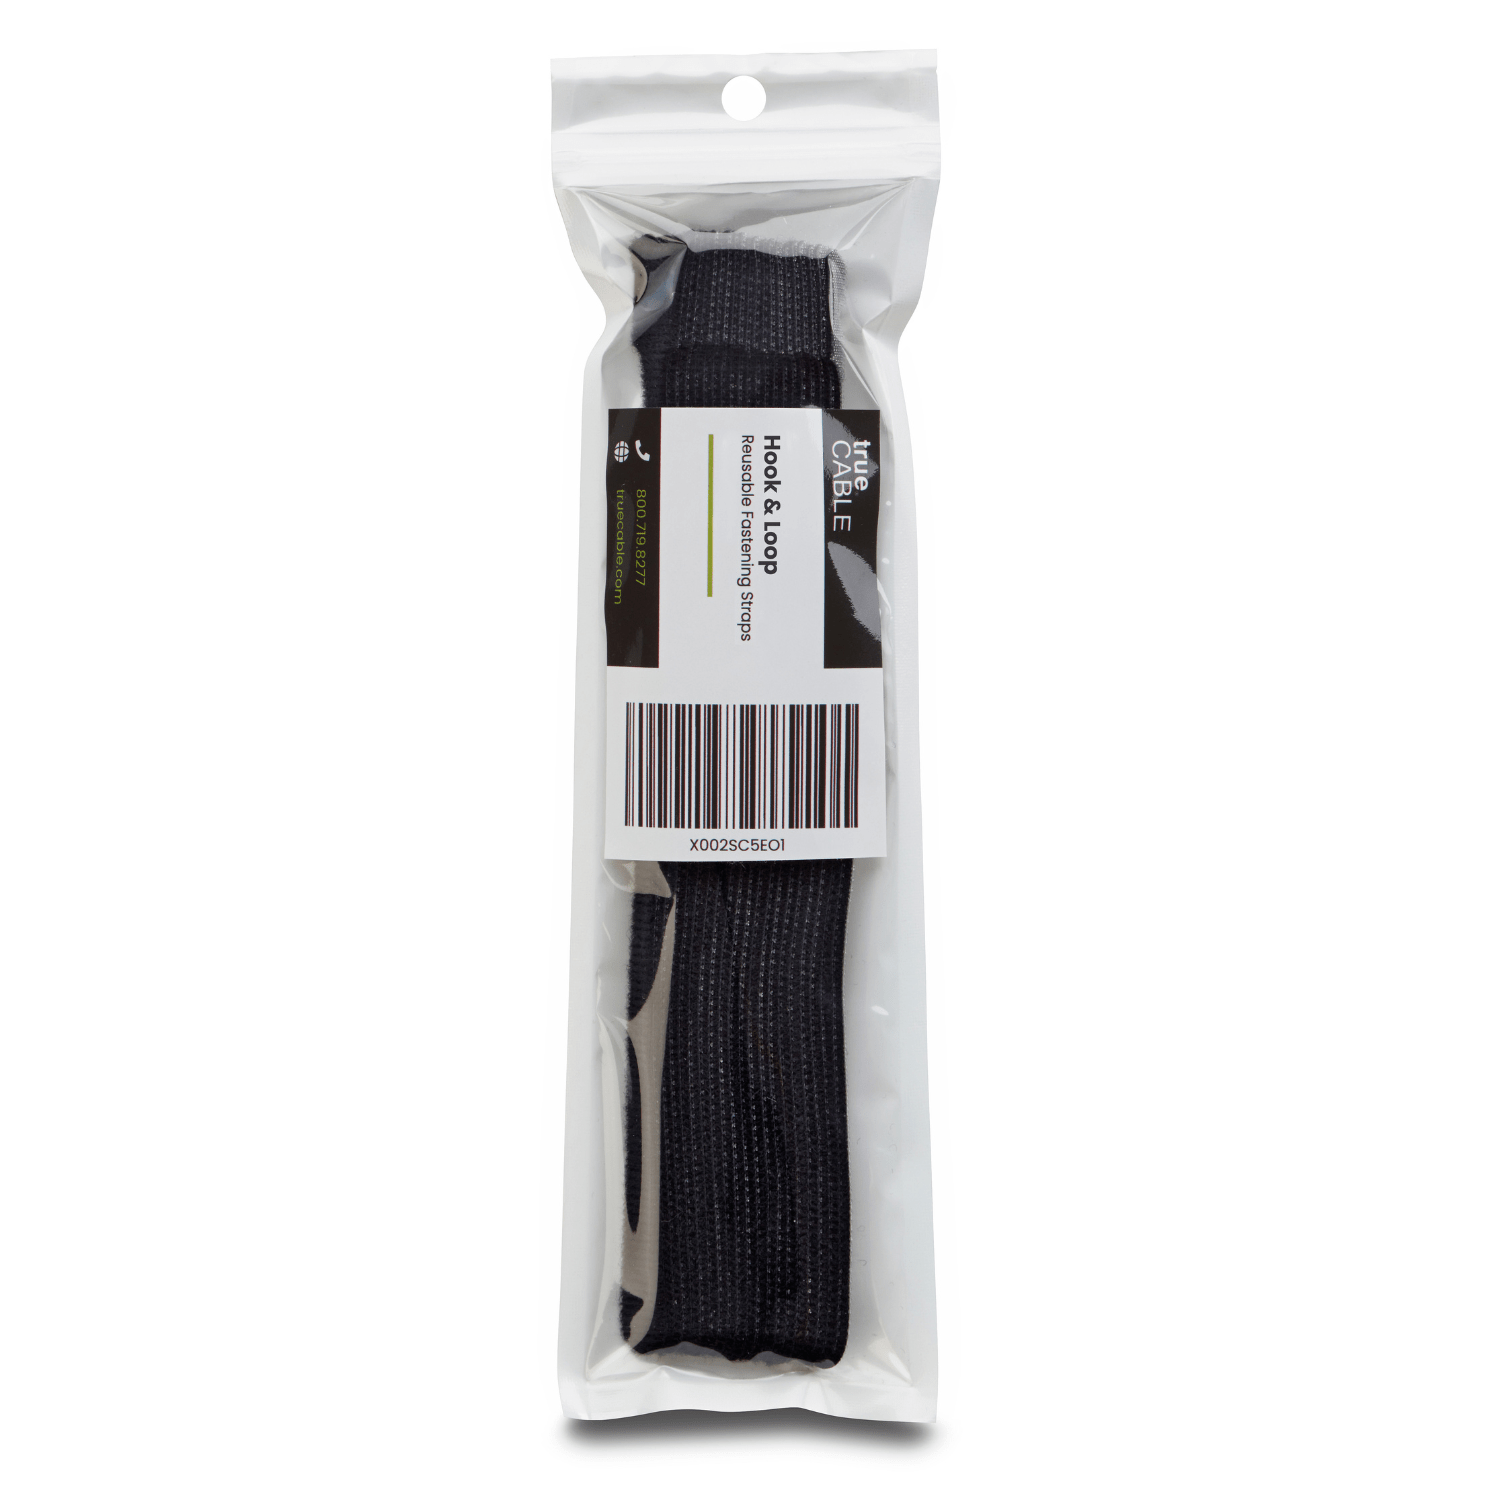 Store House 10 Inch Cord & Cable Hook Loop Black Nylon Fasteners Cable Ties